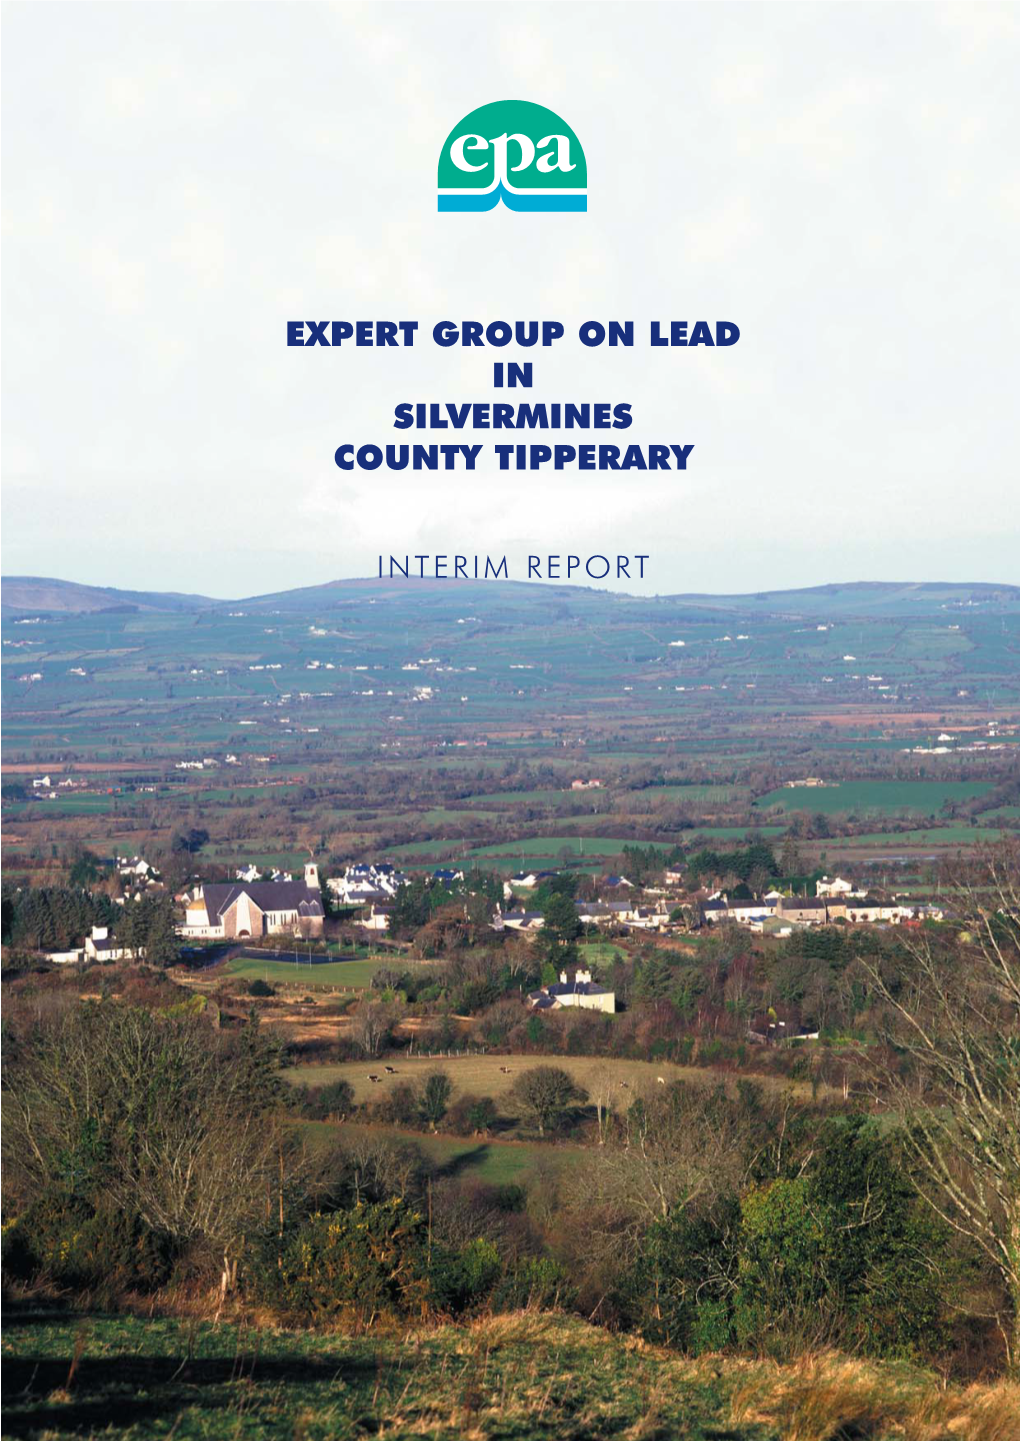 Expert Group on Lead in Silvermines County Tipperary